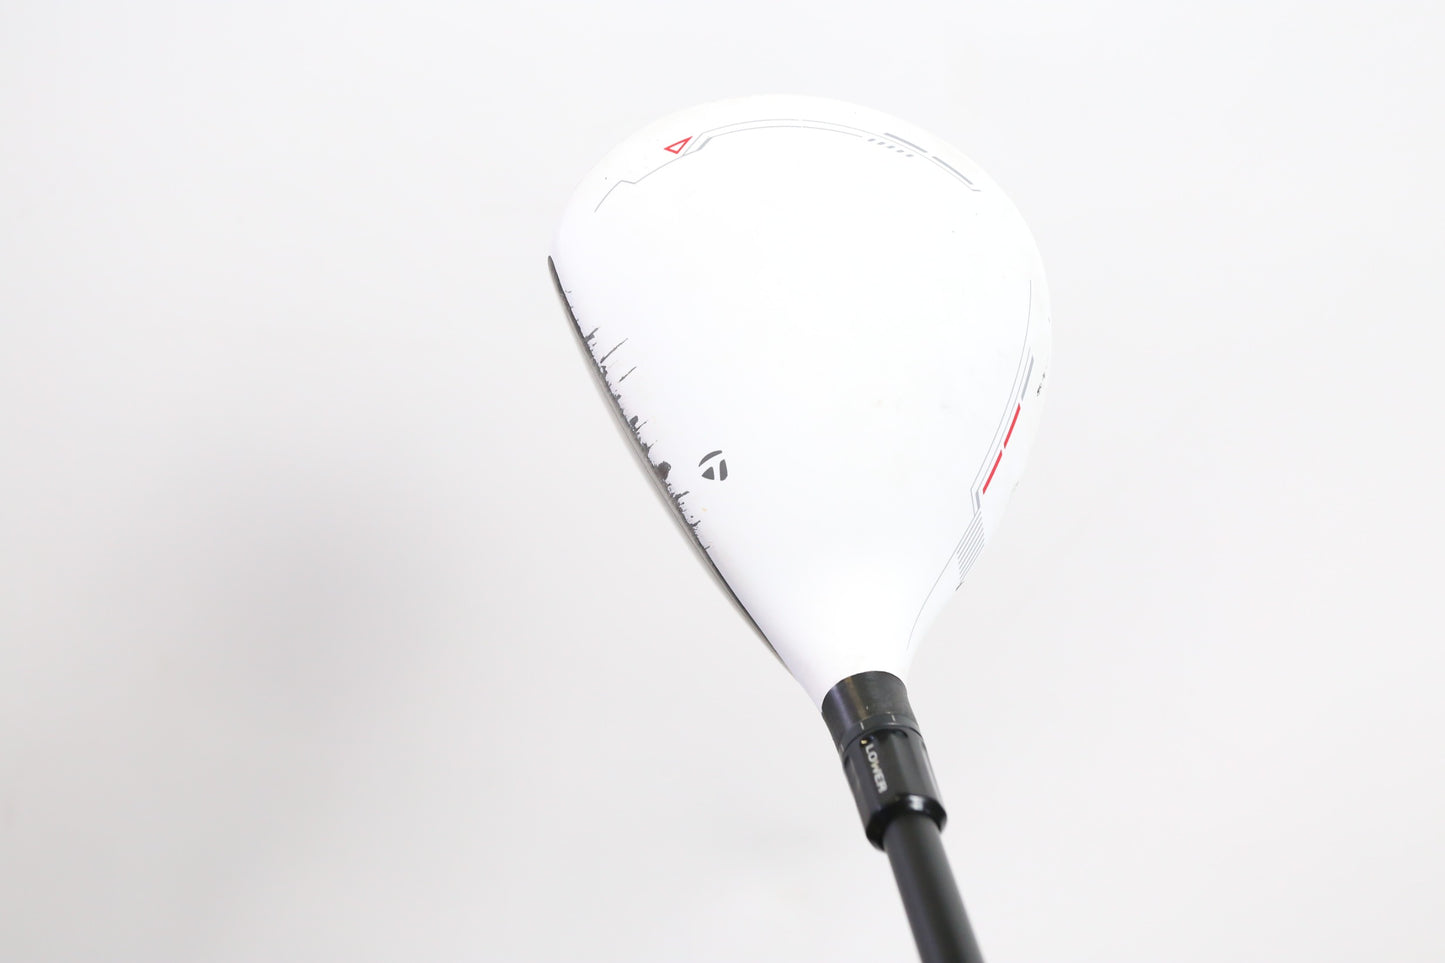 Used TaylorMade R11 3-Wood - Right-Handed - 15.5 Degrees - Stiff Flex